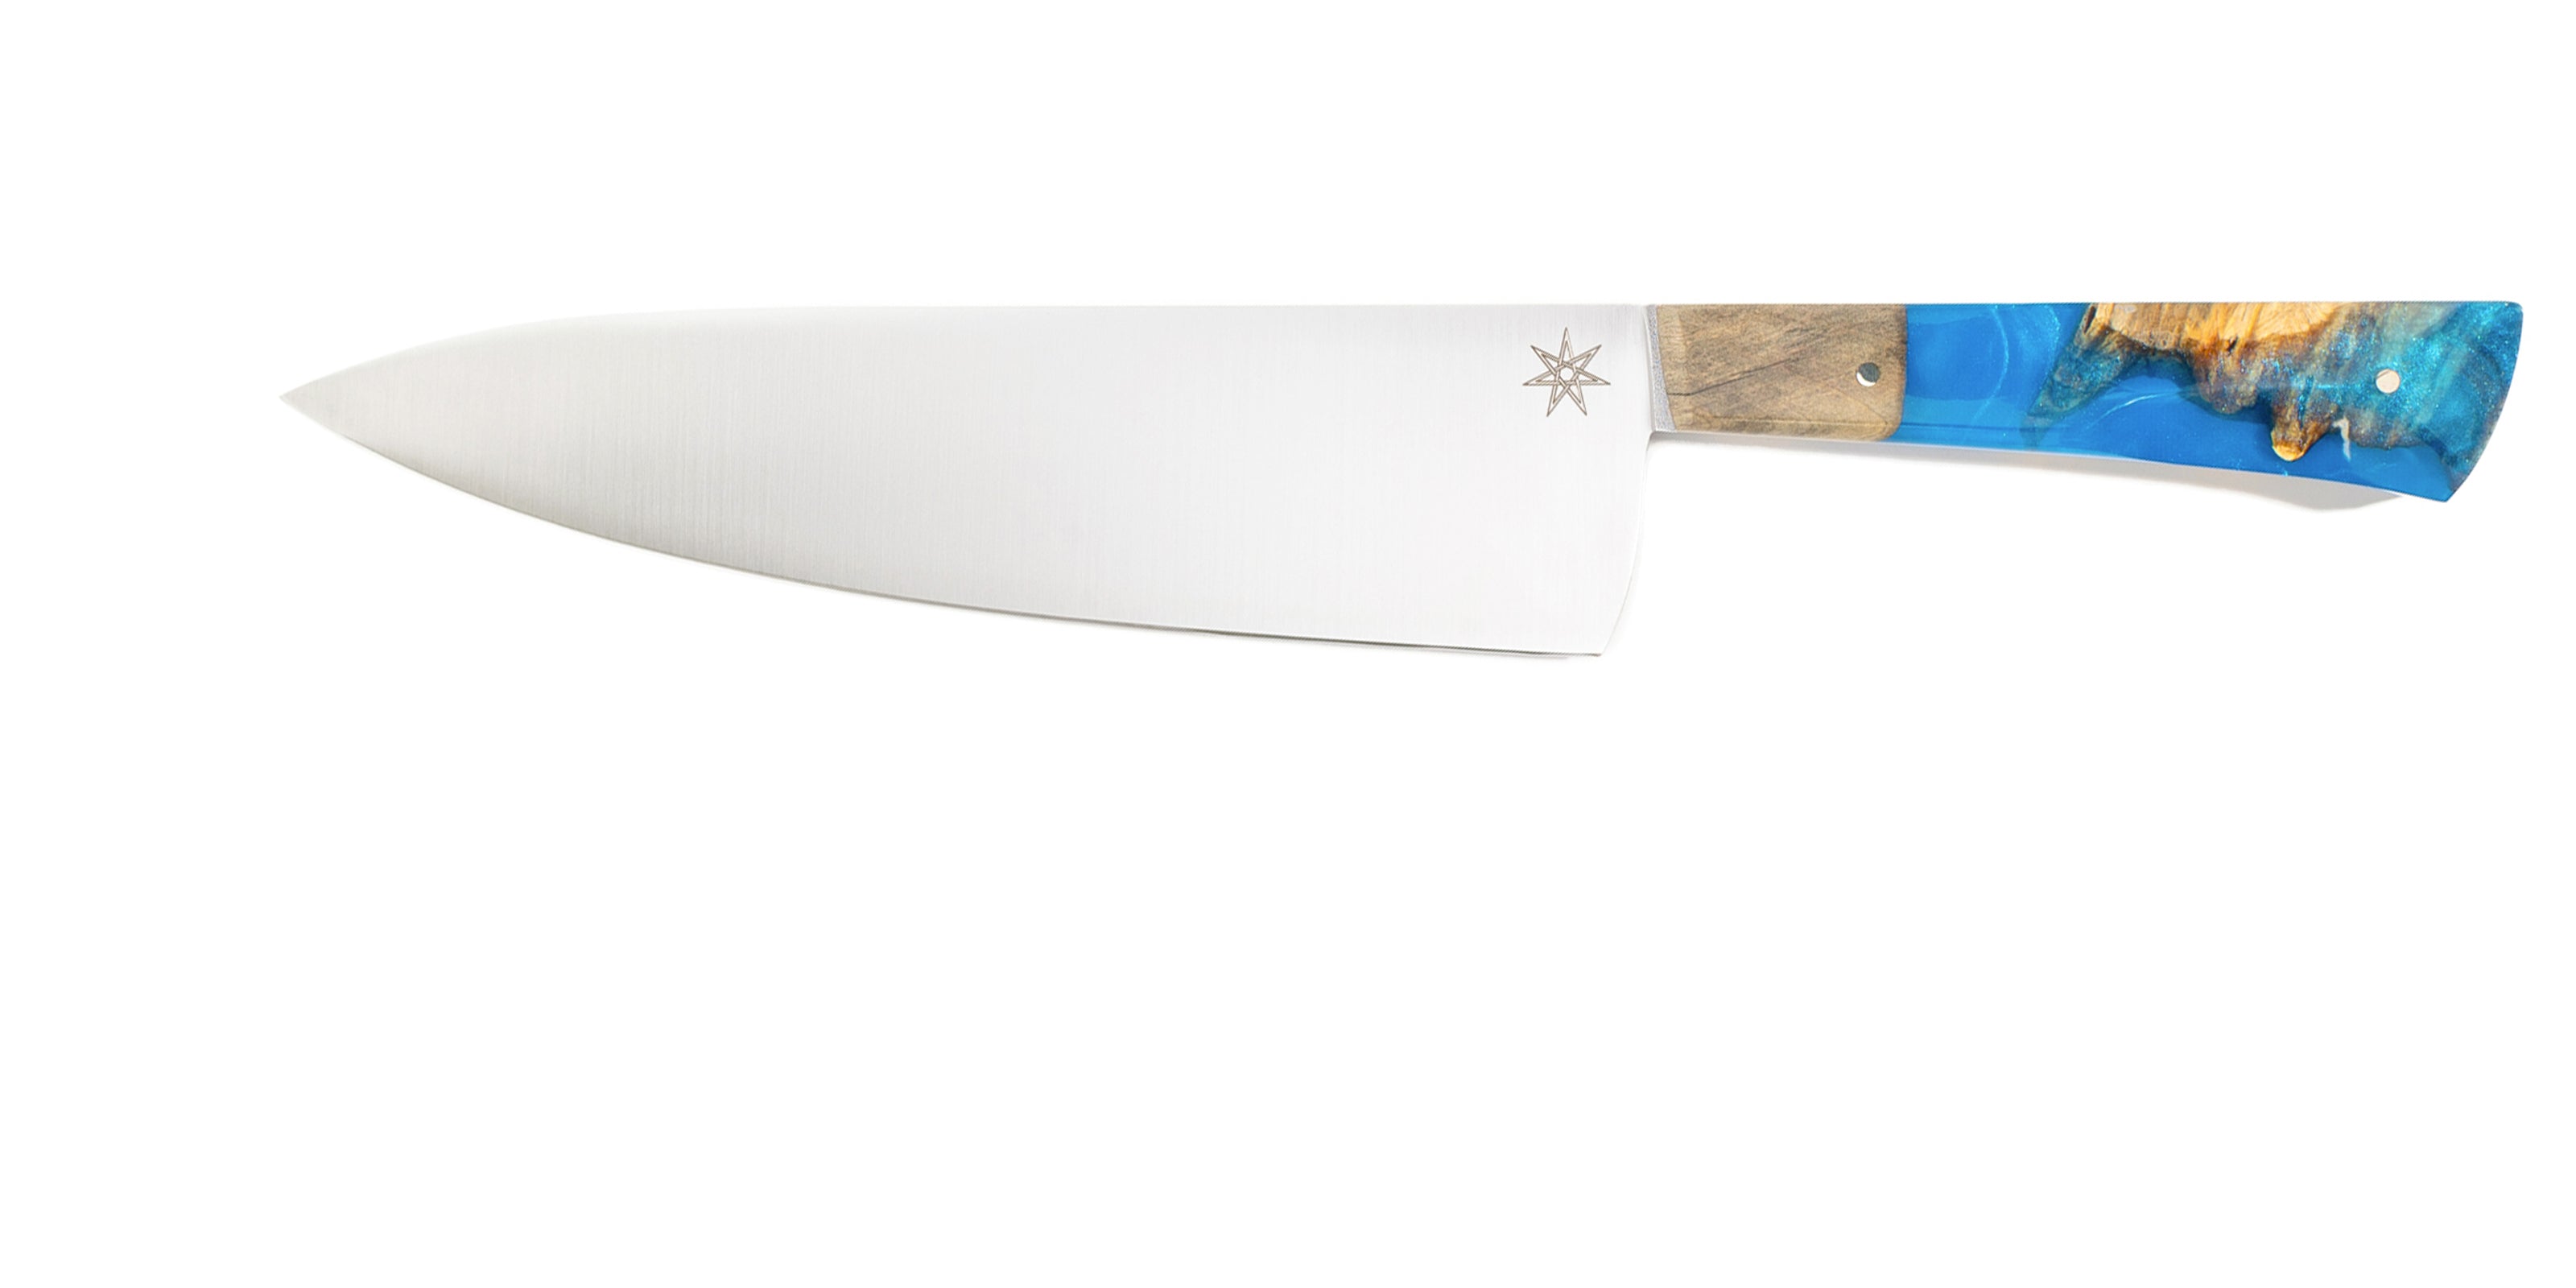 Town Cutler Tahoe Bliss Chef Knife.